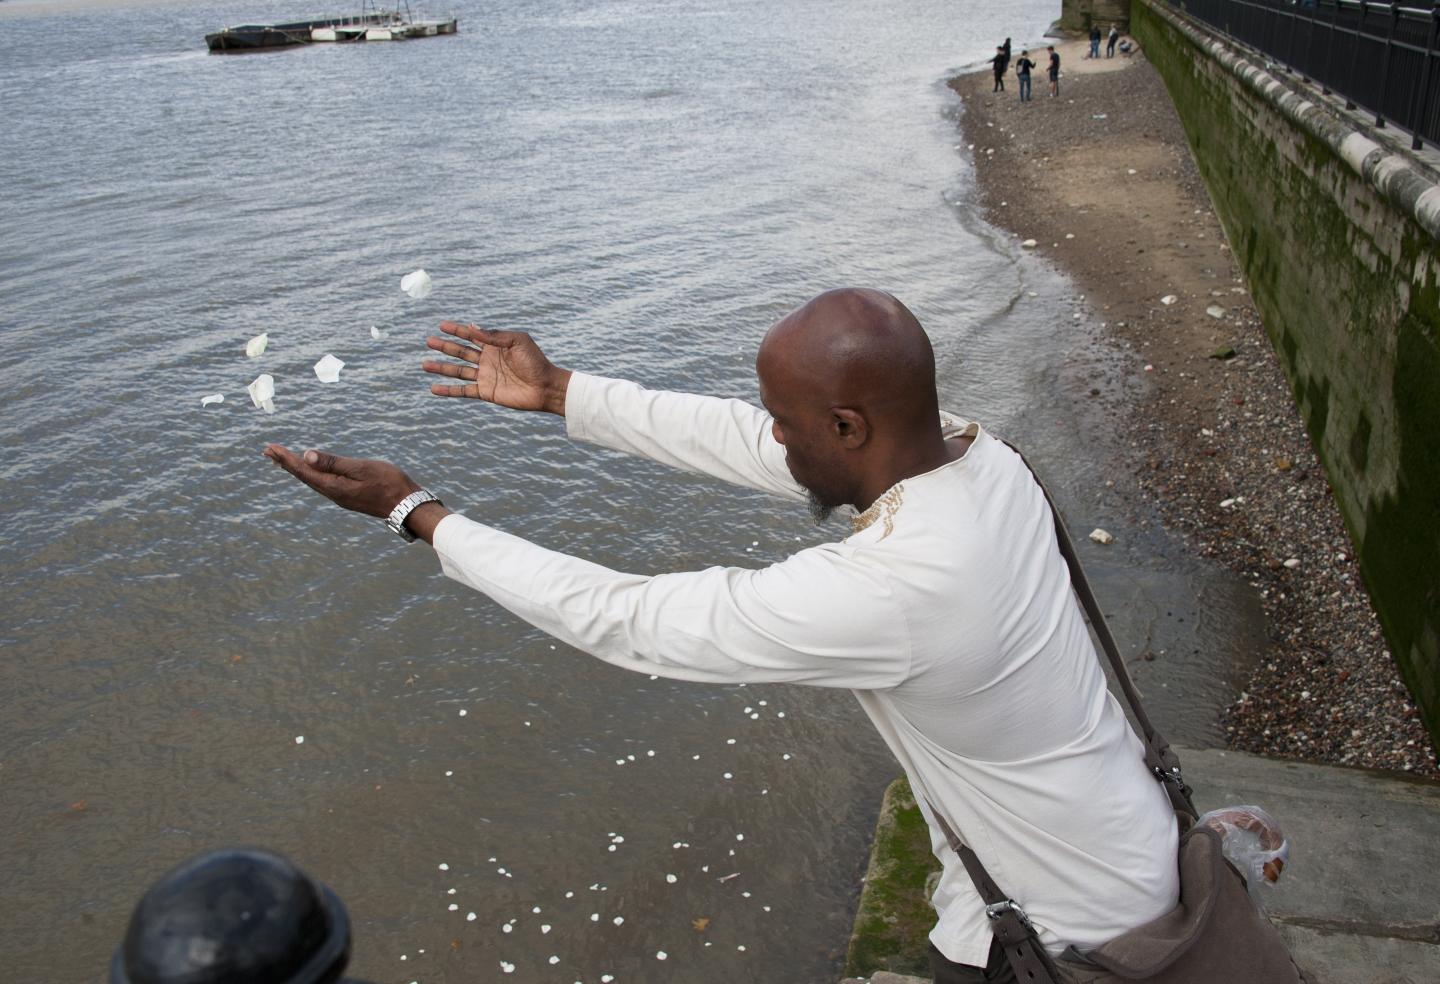 The image shows a man scattering white petals into the River Thames.